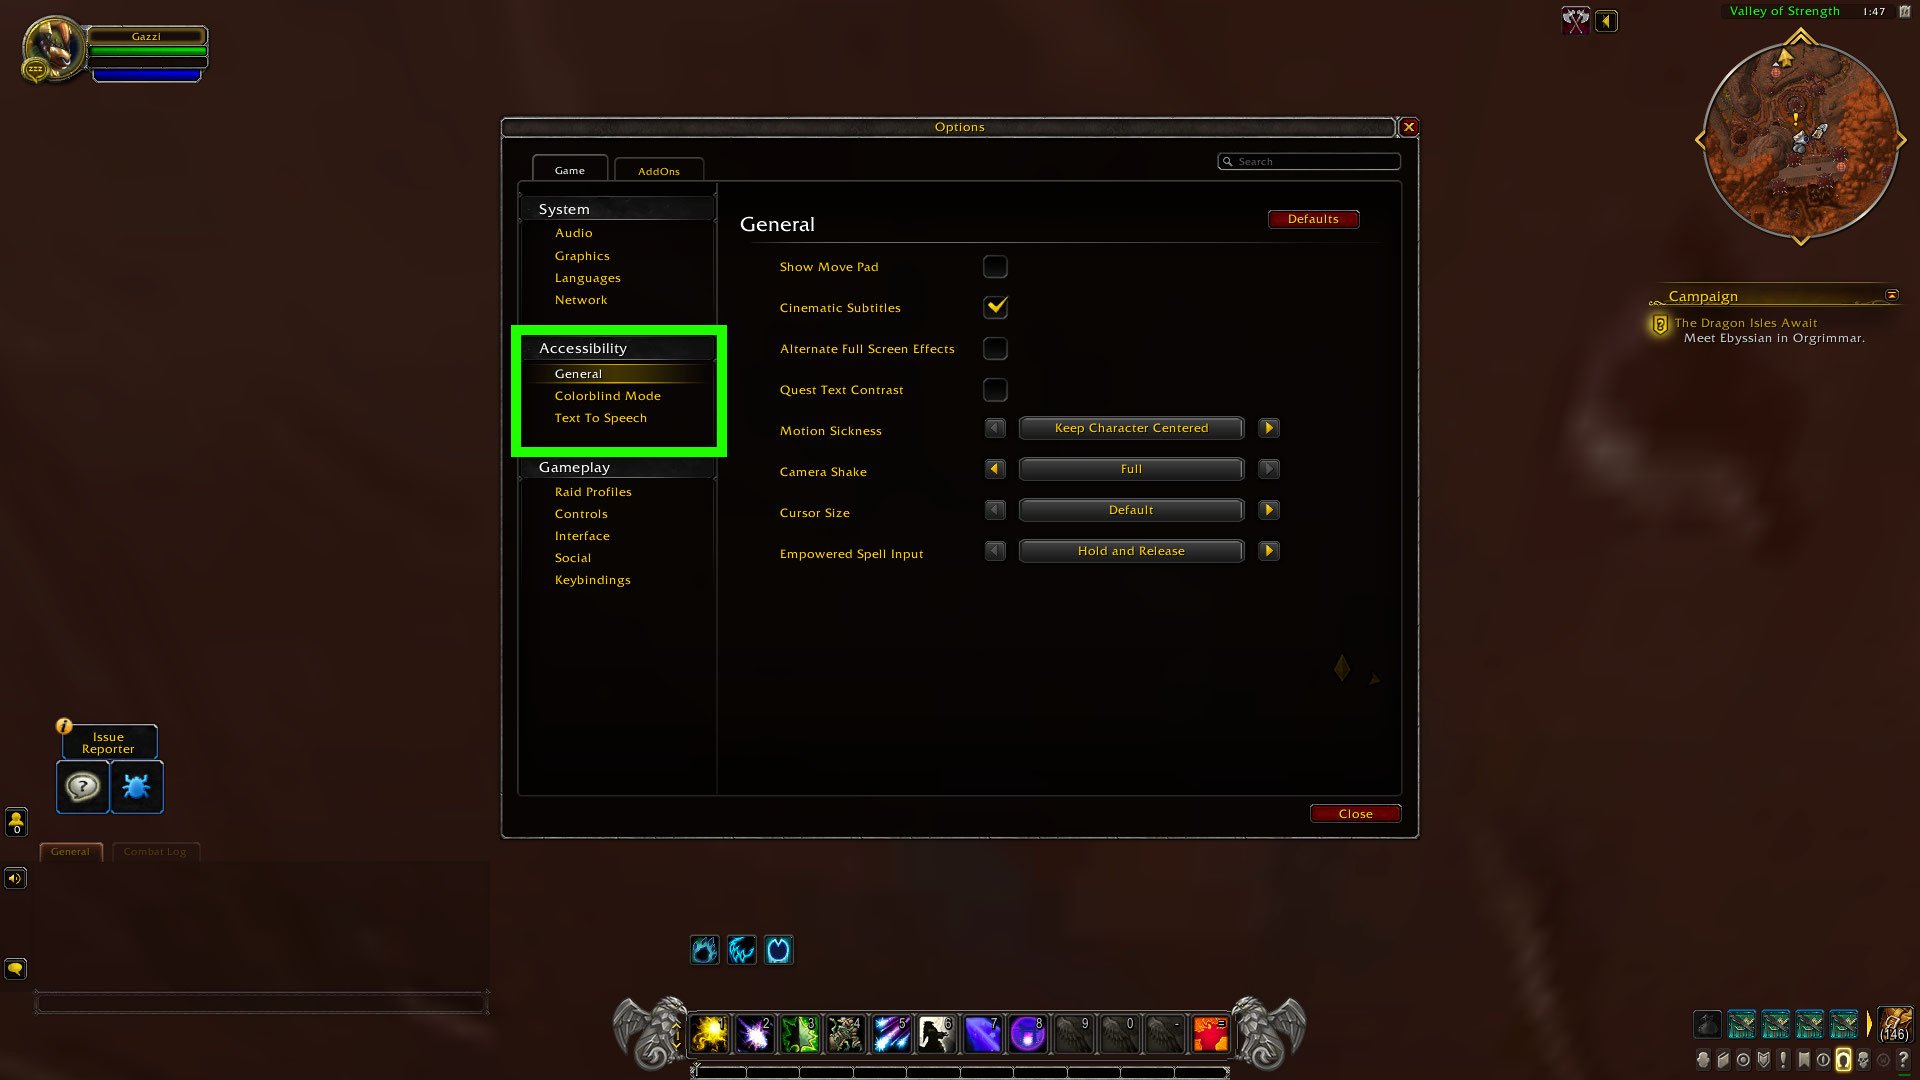 The Game Options menu, showing the accessibility section highlighted.